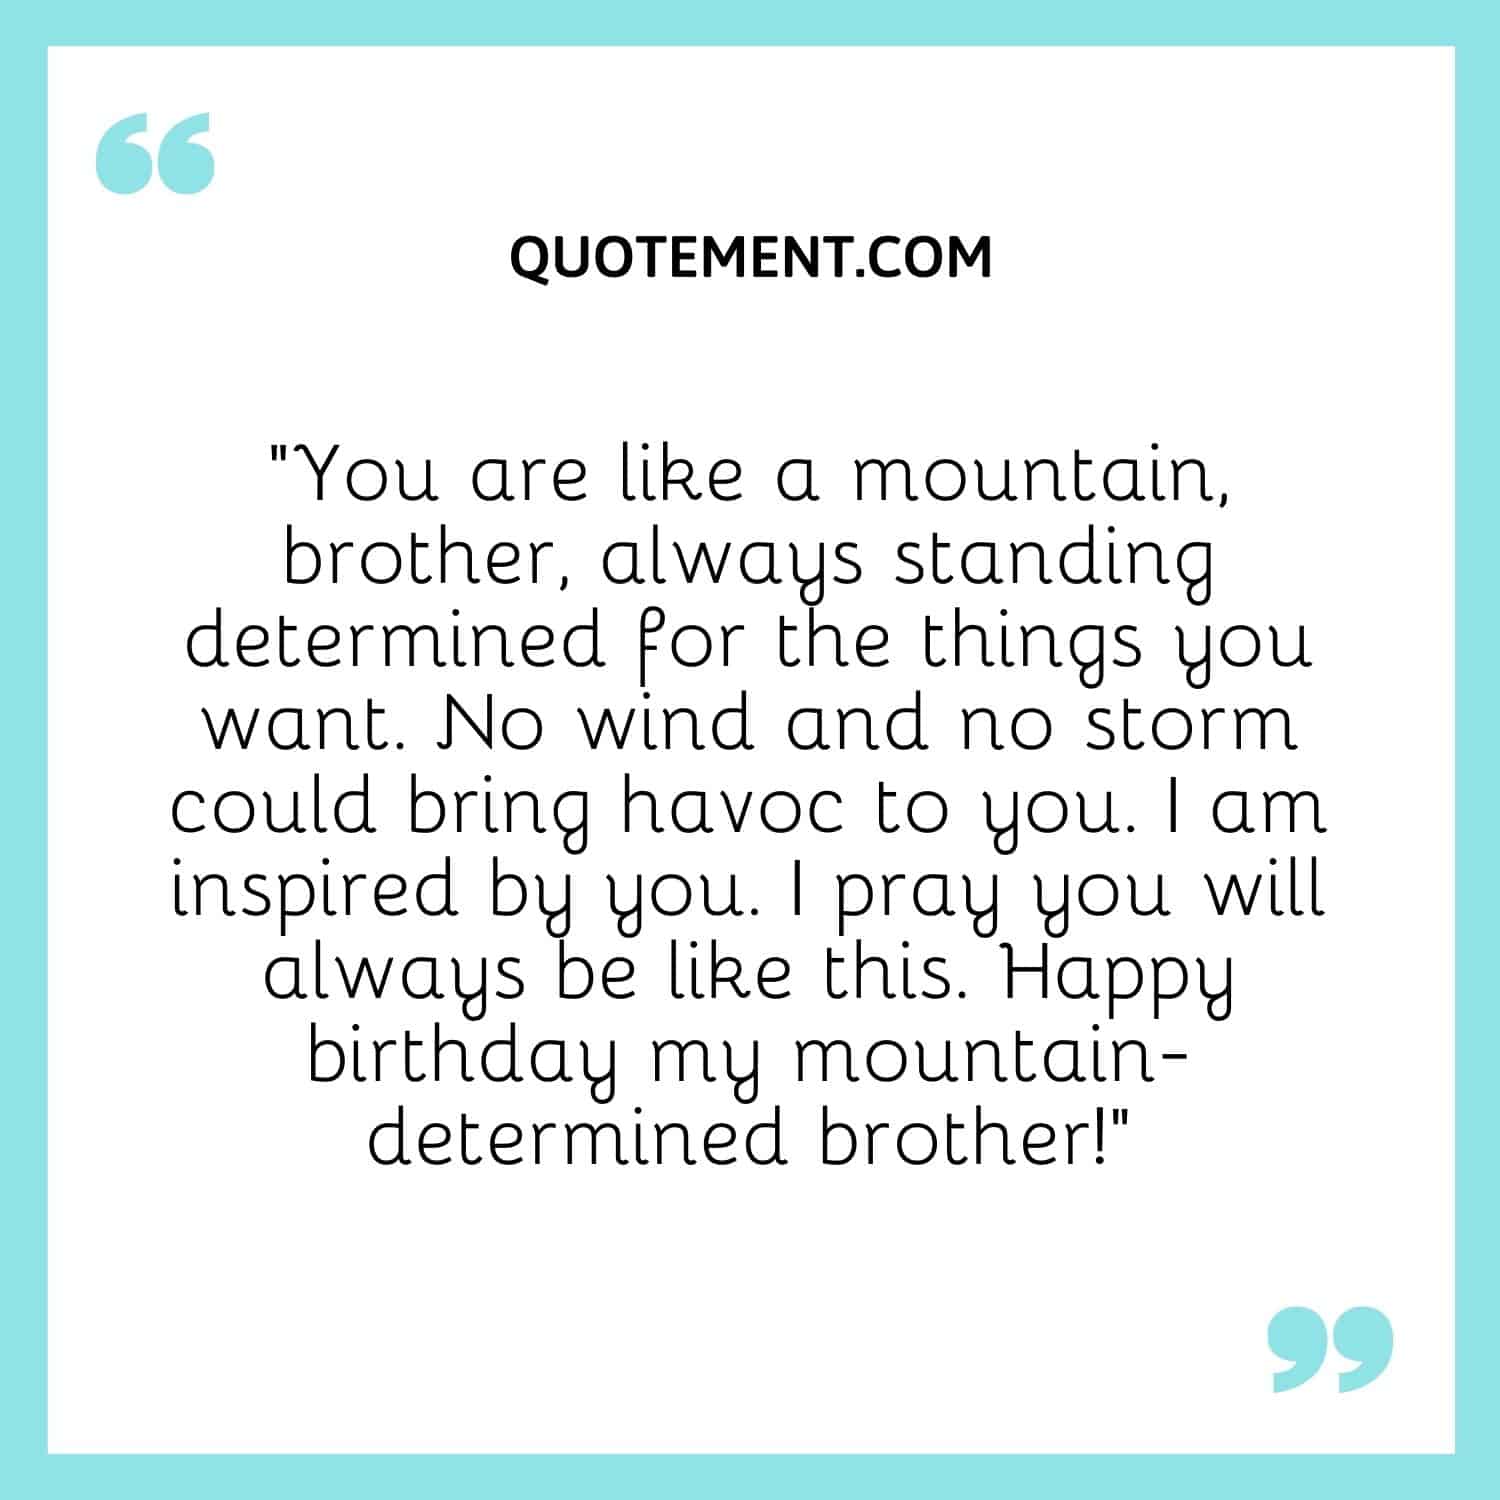 You are like a mountain, brother, always standing determined for the things you want.